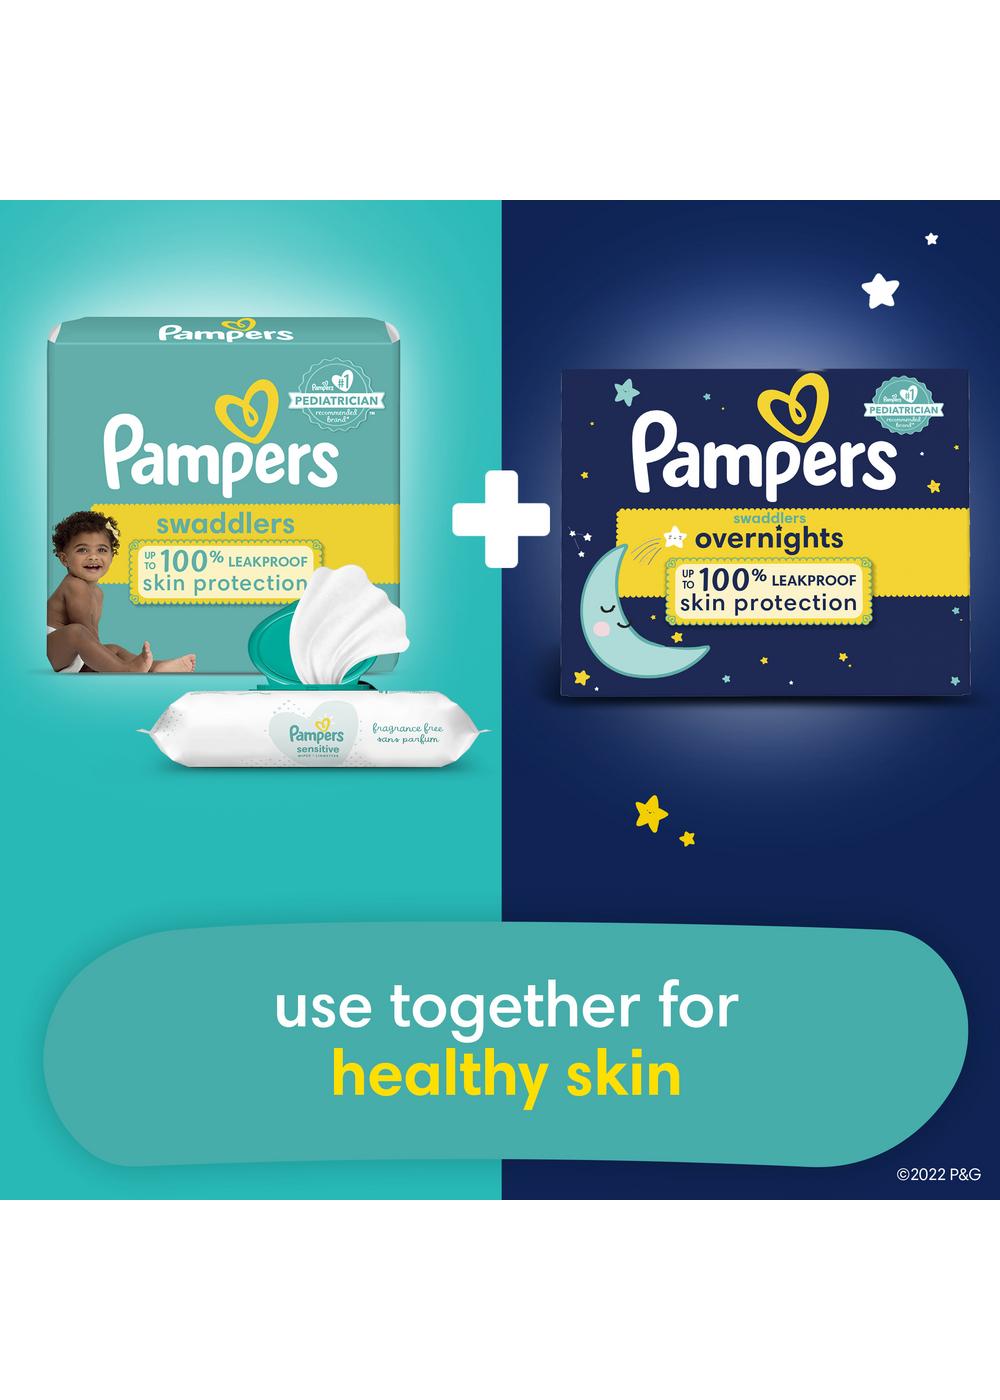 Pampers Swaddlers Baby Diapers - Size 1 - Shop Diapers at H-E-B